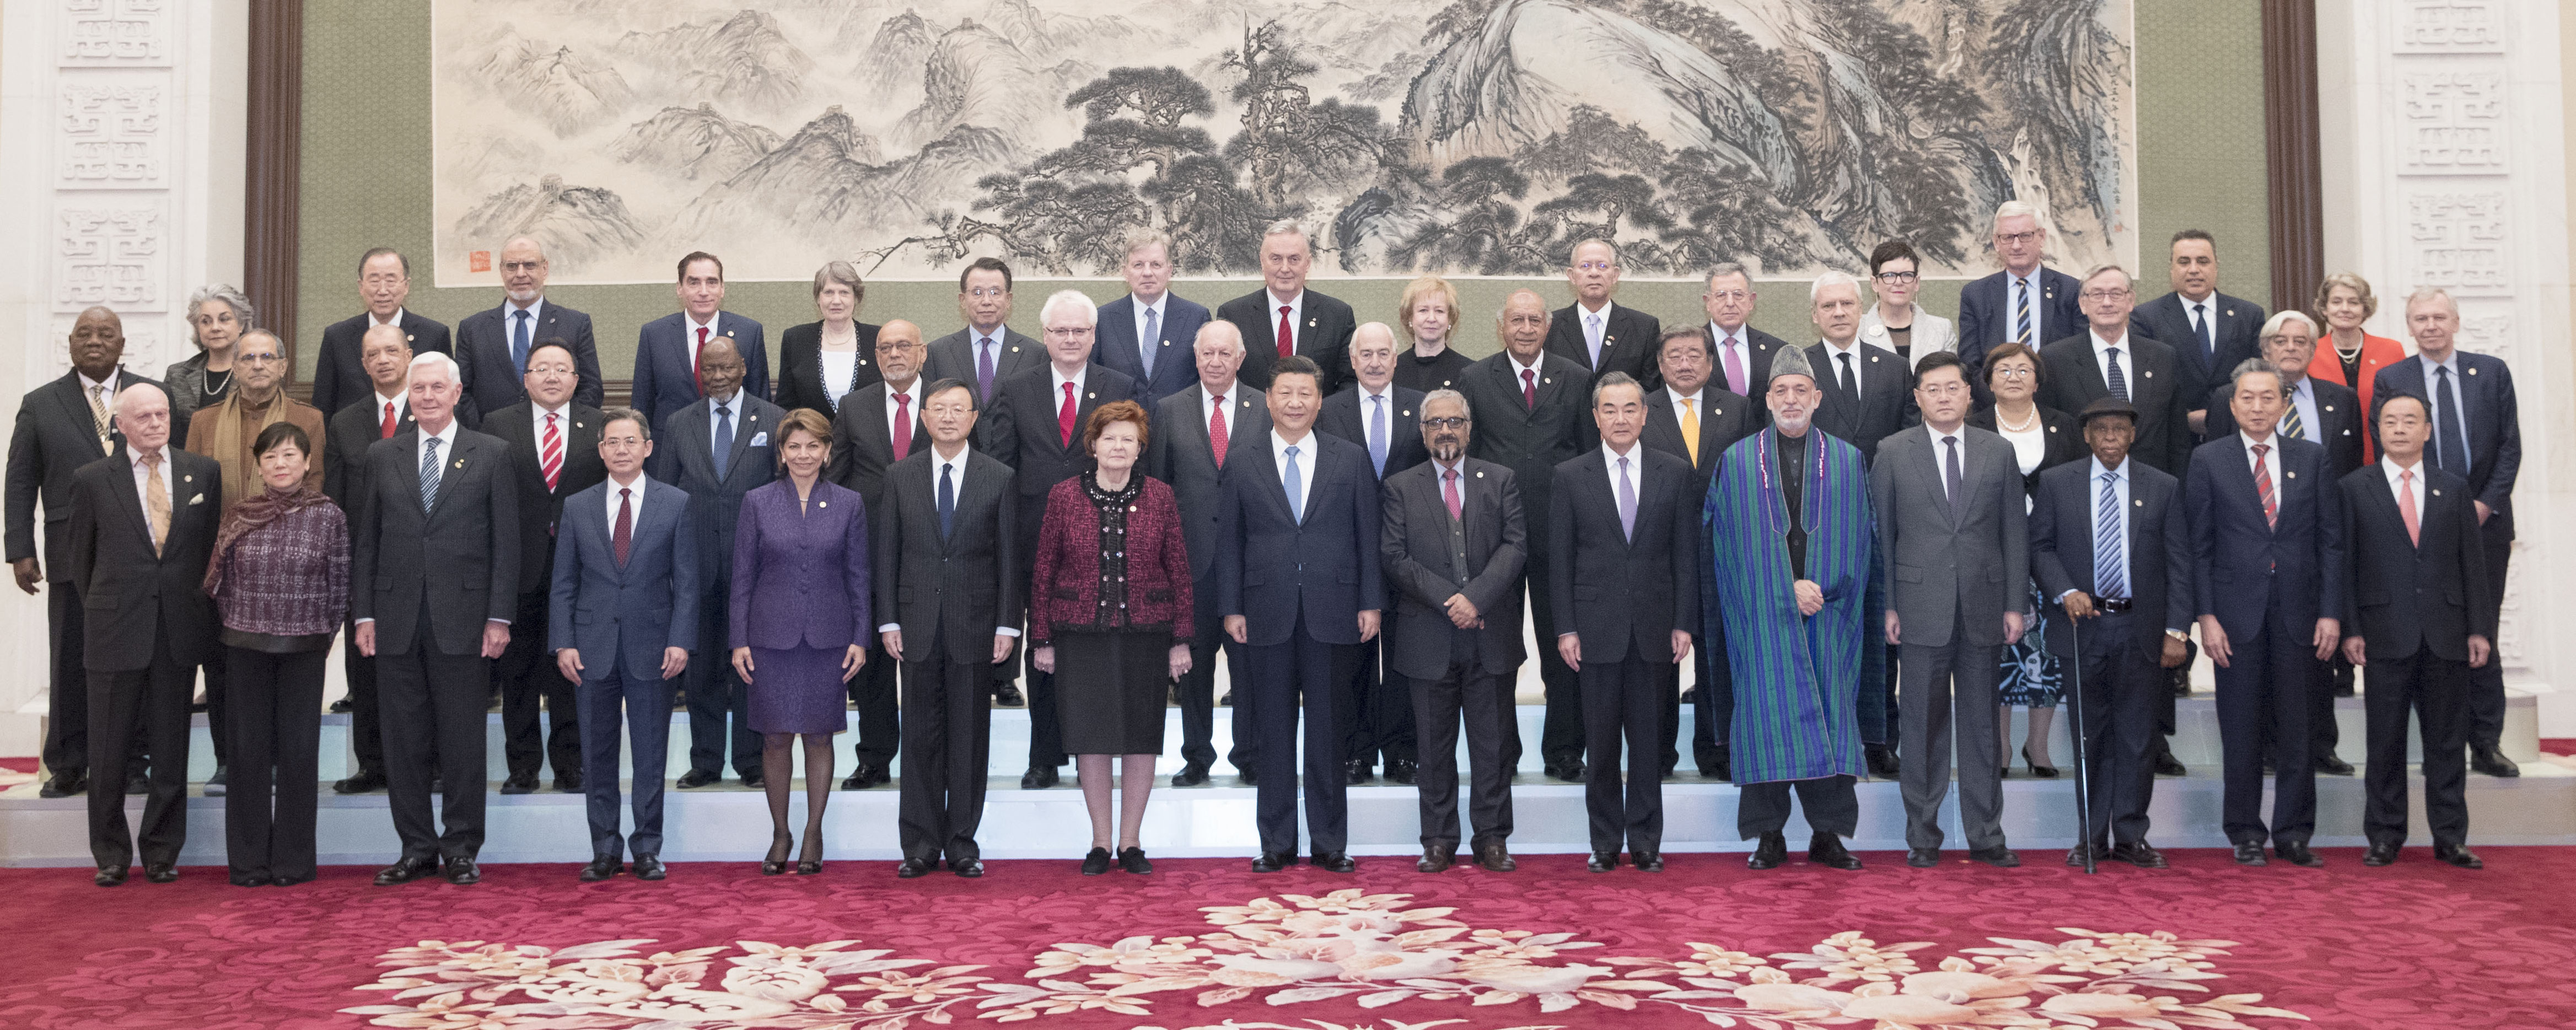 Club de Madrid Discusses Global Governance in China and Presents Conclusions to Xi Jinping